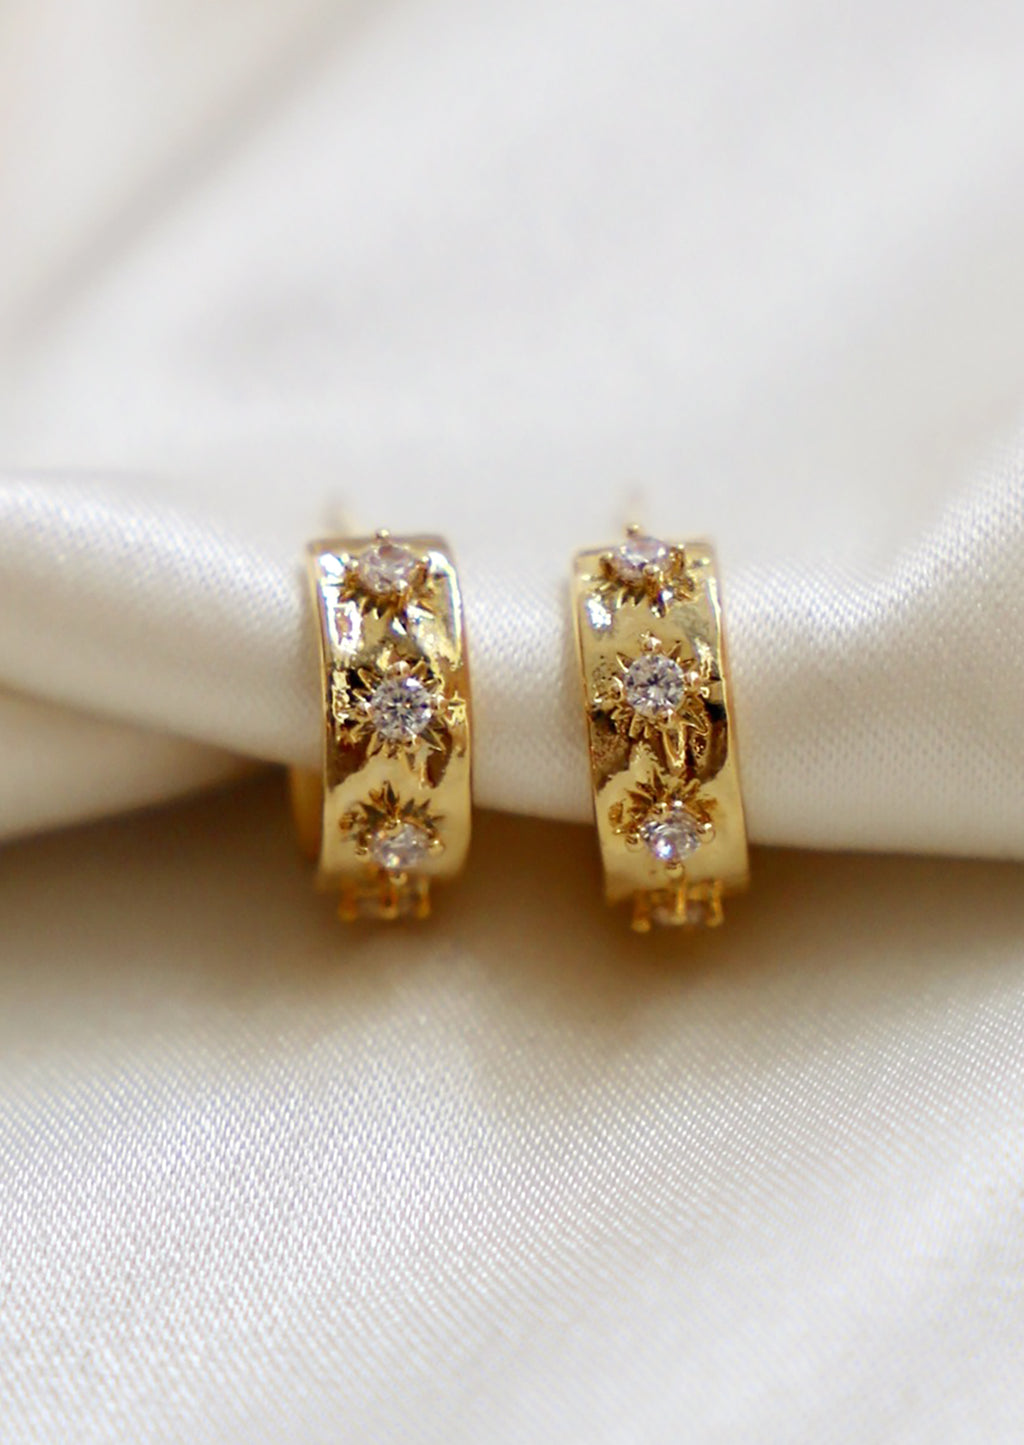 1: A pair of small gold hoop earrings with raised crystal starbust pattern.